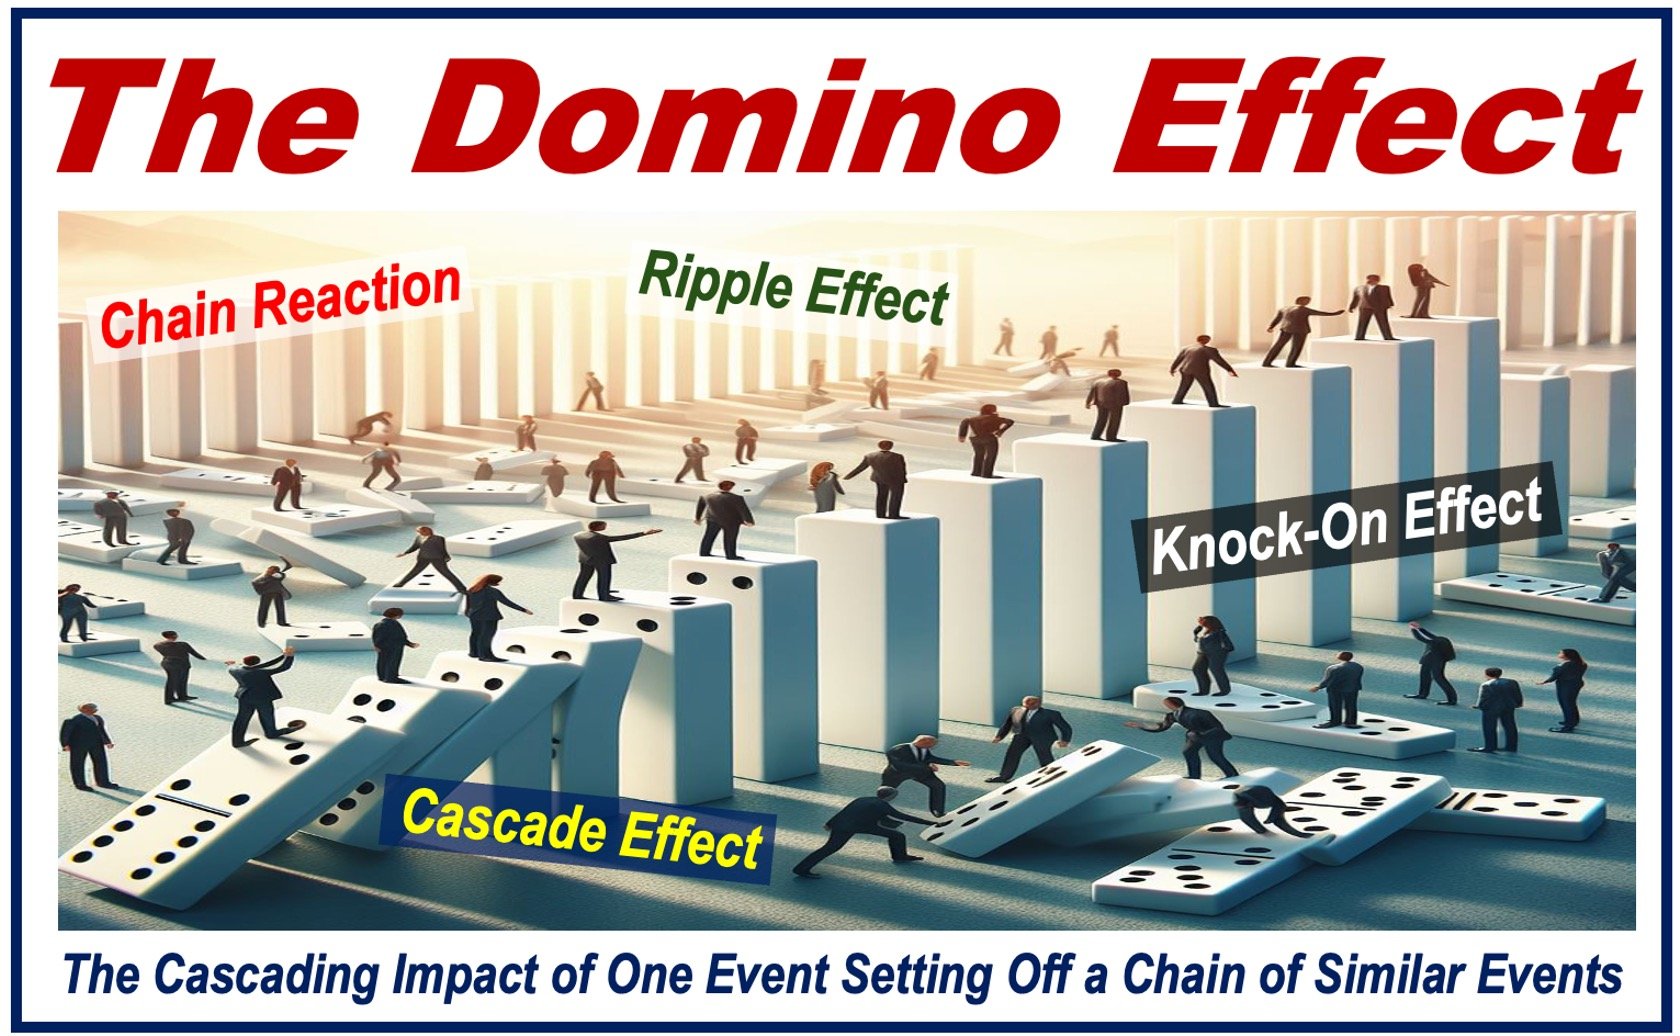 Image with lots of people and dominoes, plus a definition of THE DOMINO EFFECT.